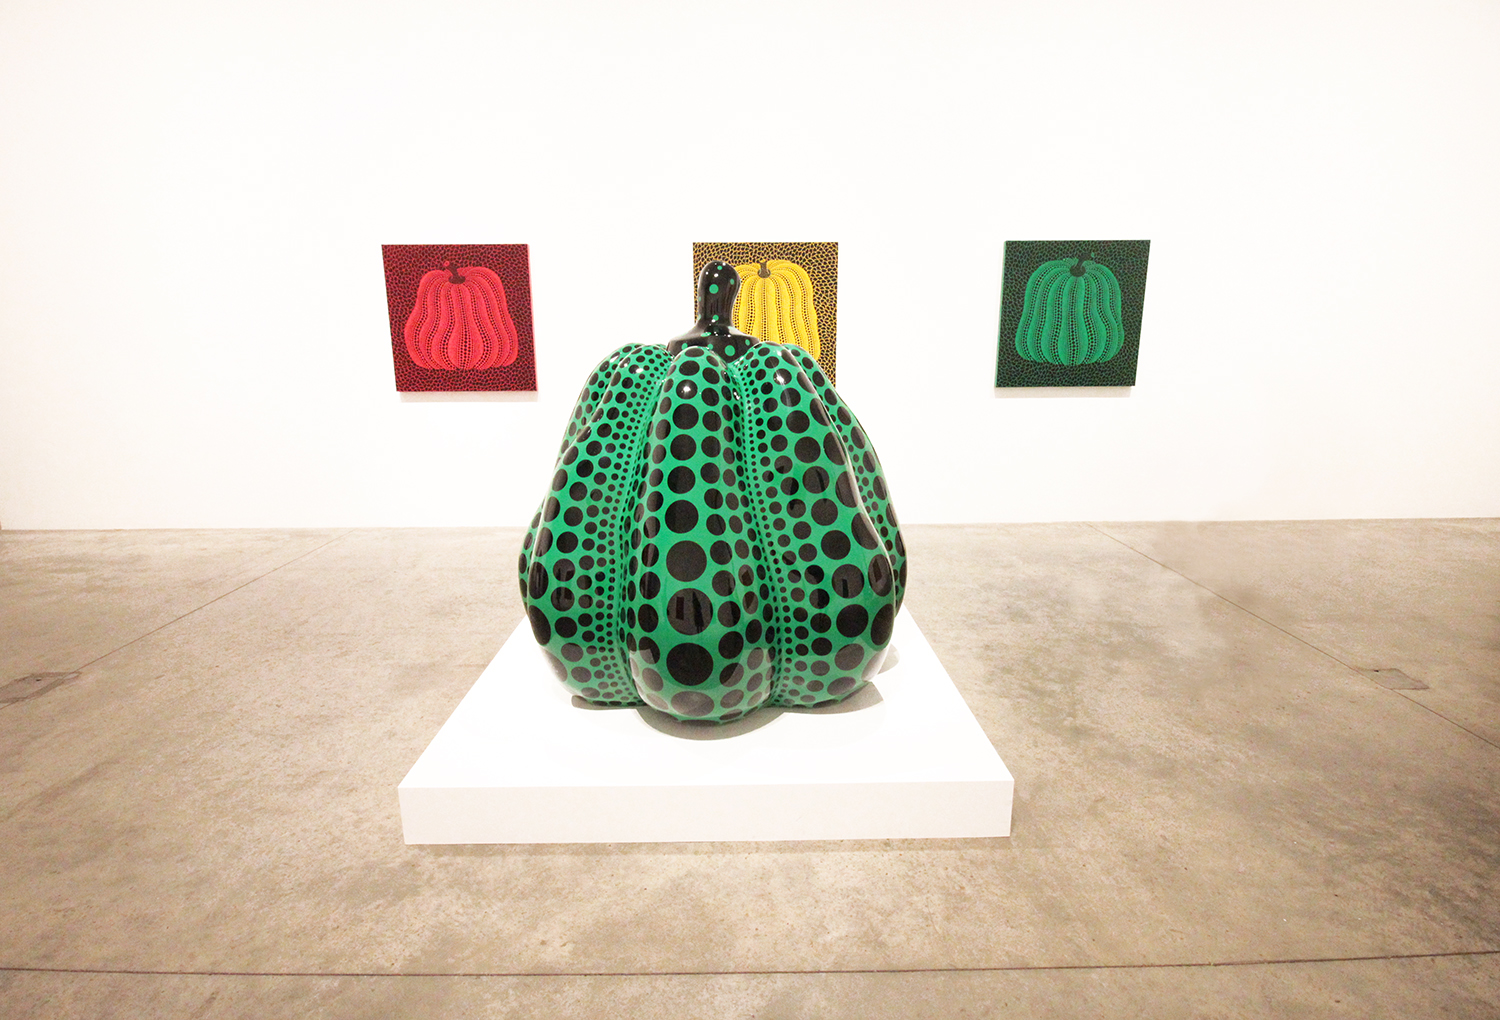 Yayoi Kusama exhibition at the Victoria Miro gallery - art lover's guide to London